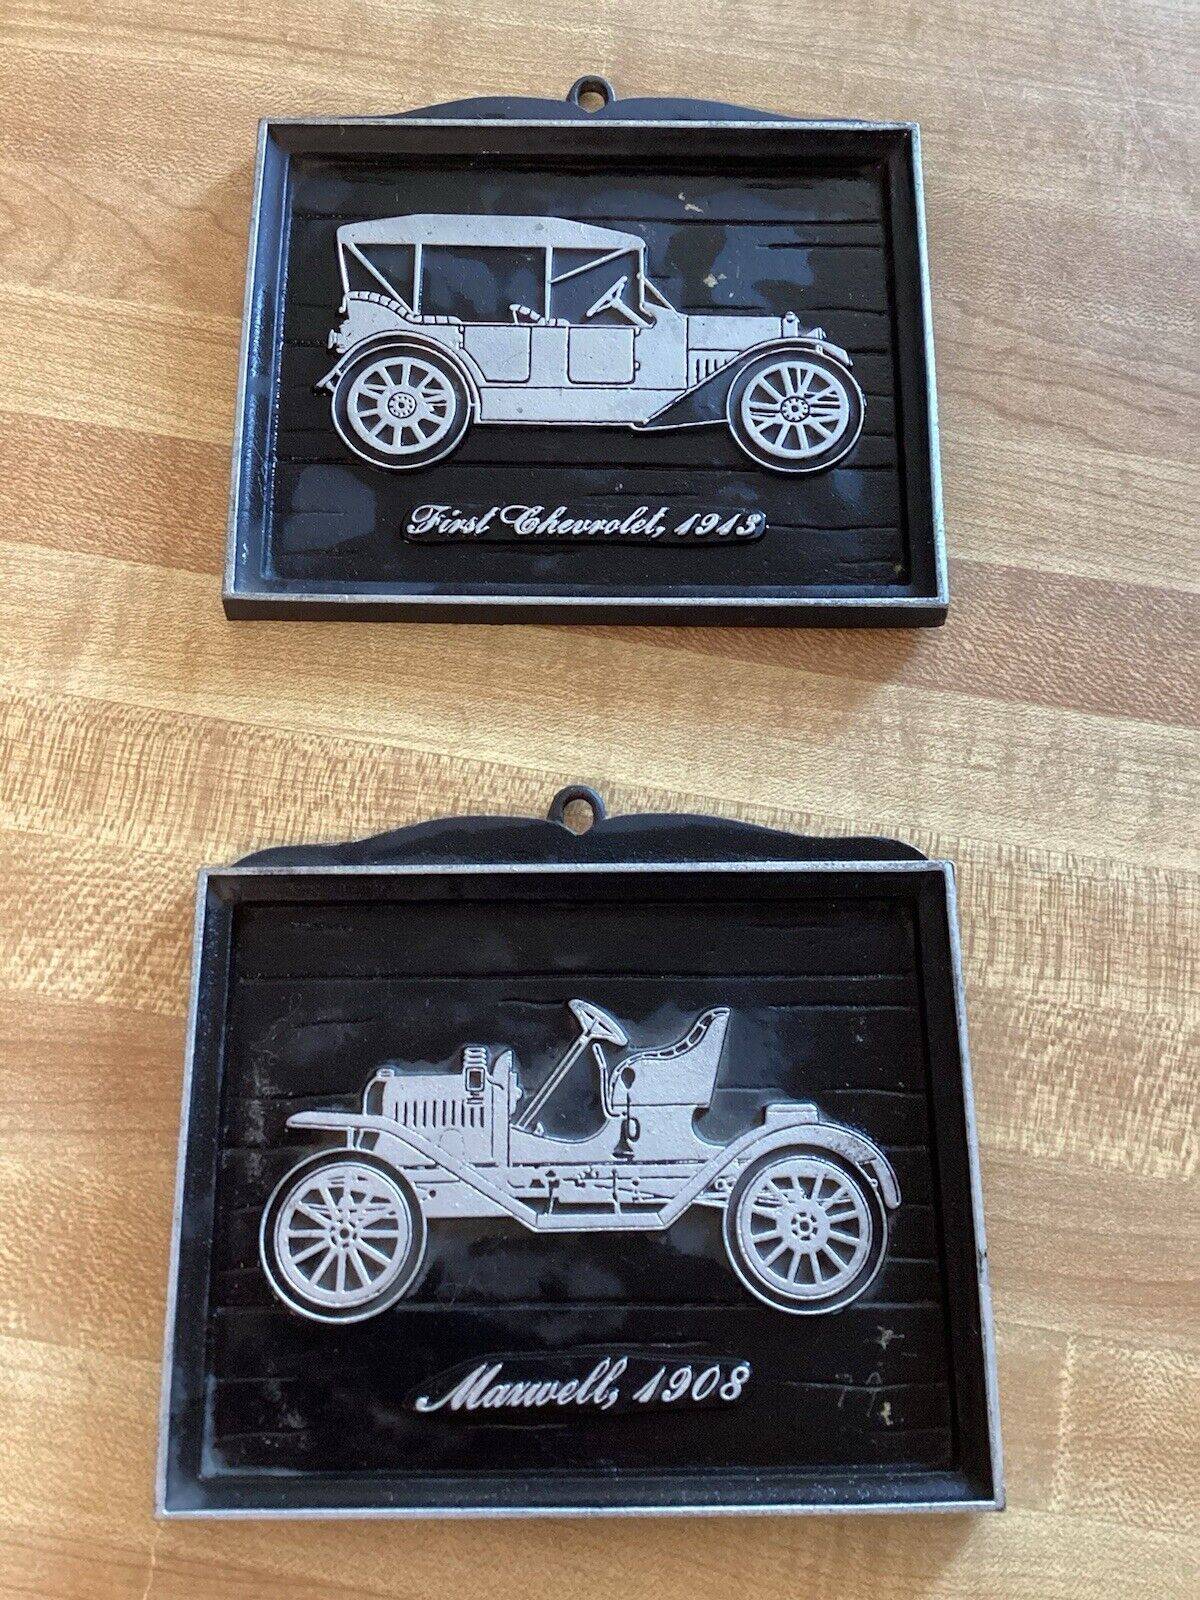  Lot Of 2 Vintage Cast Iron Wall Sign Car Art-1st Chevrolet 1913 & Maxwell 1908